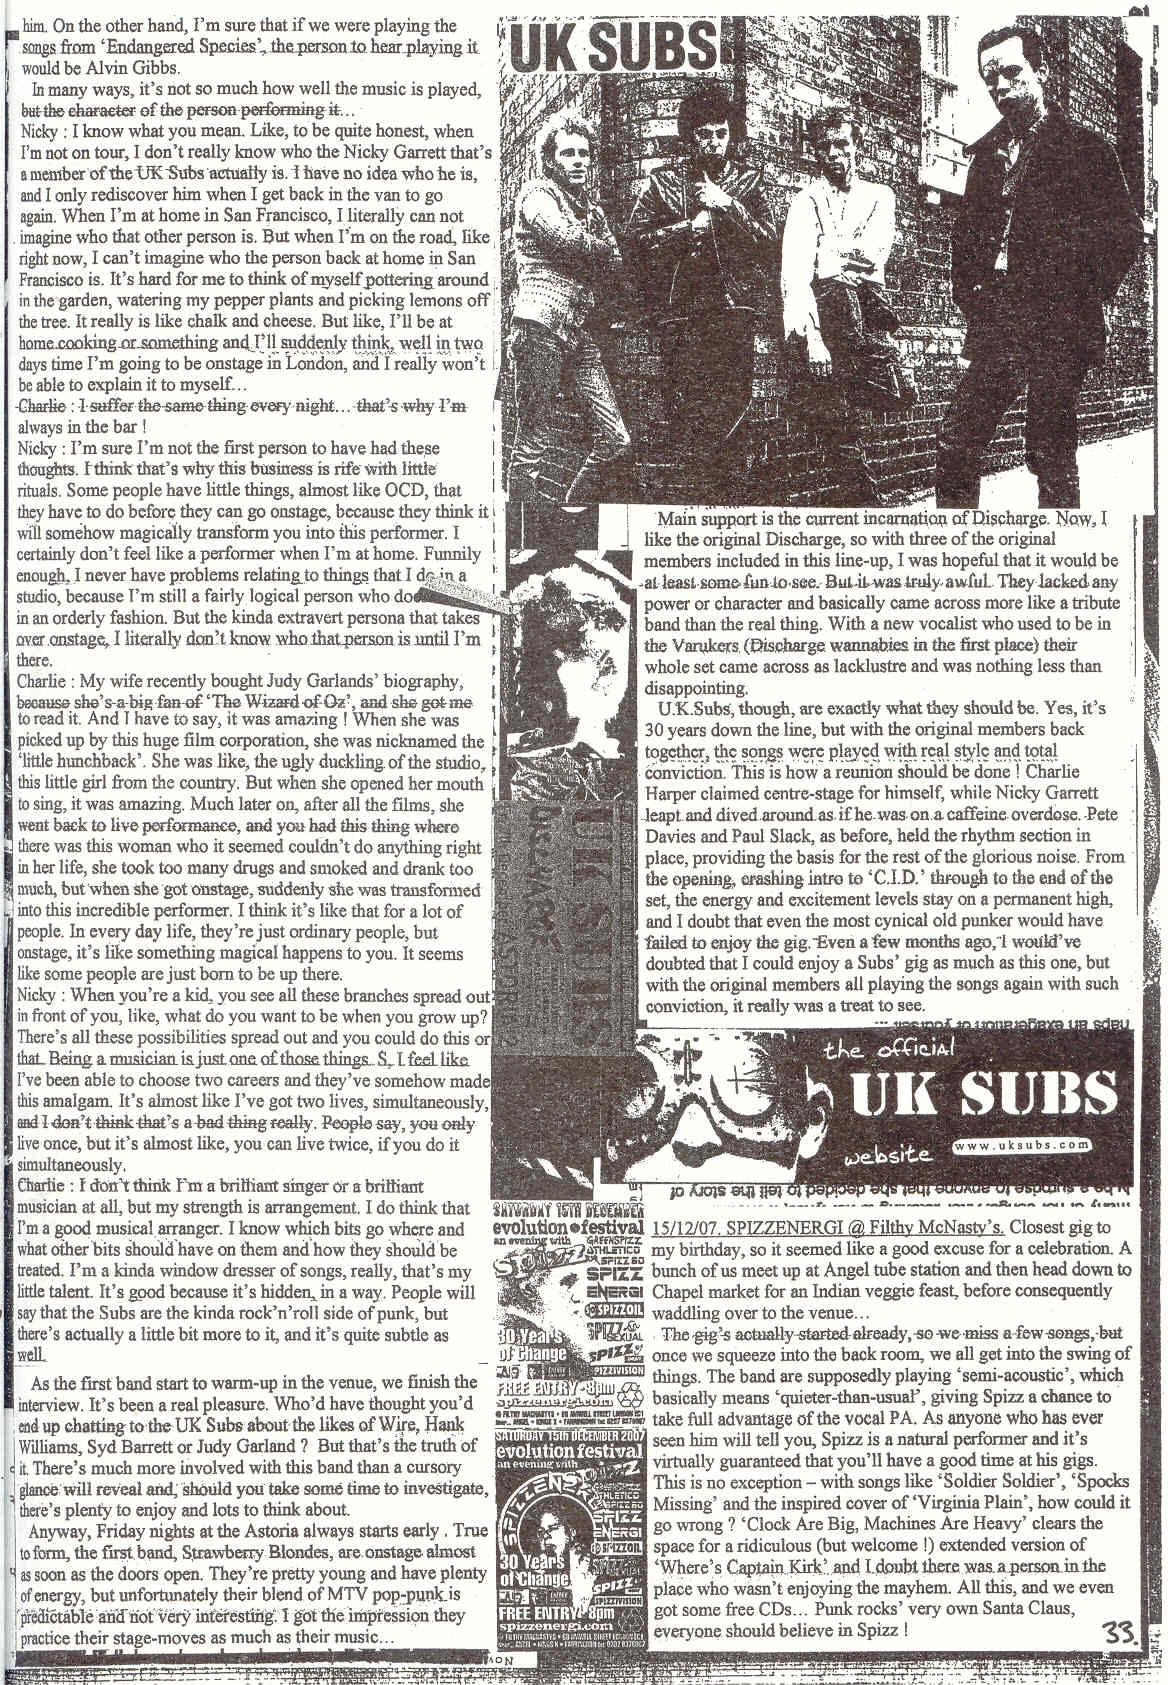 FearAndLoathing_Vol_63_March2008_CH_NGInterview_p33.jpg